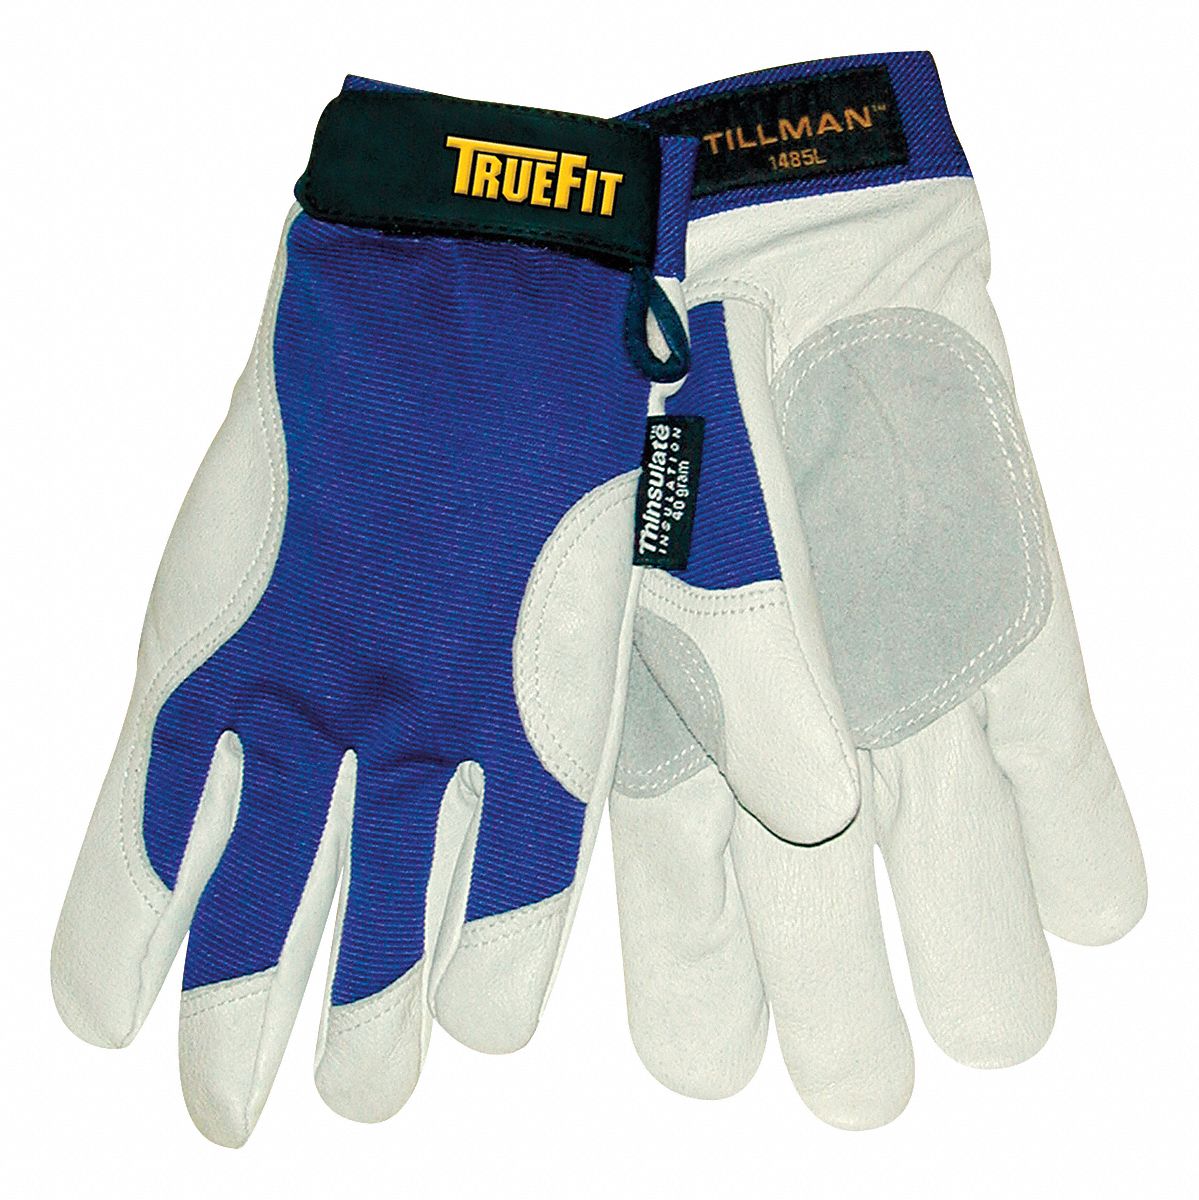 5WUH5 - Cold Protection Gloves 2XL Bl/Prl Gry PR